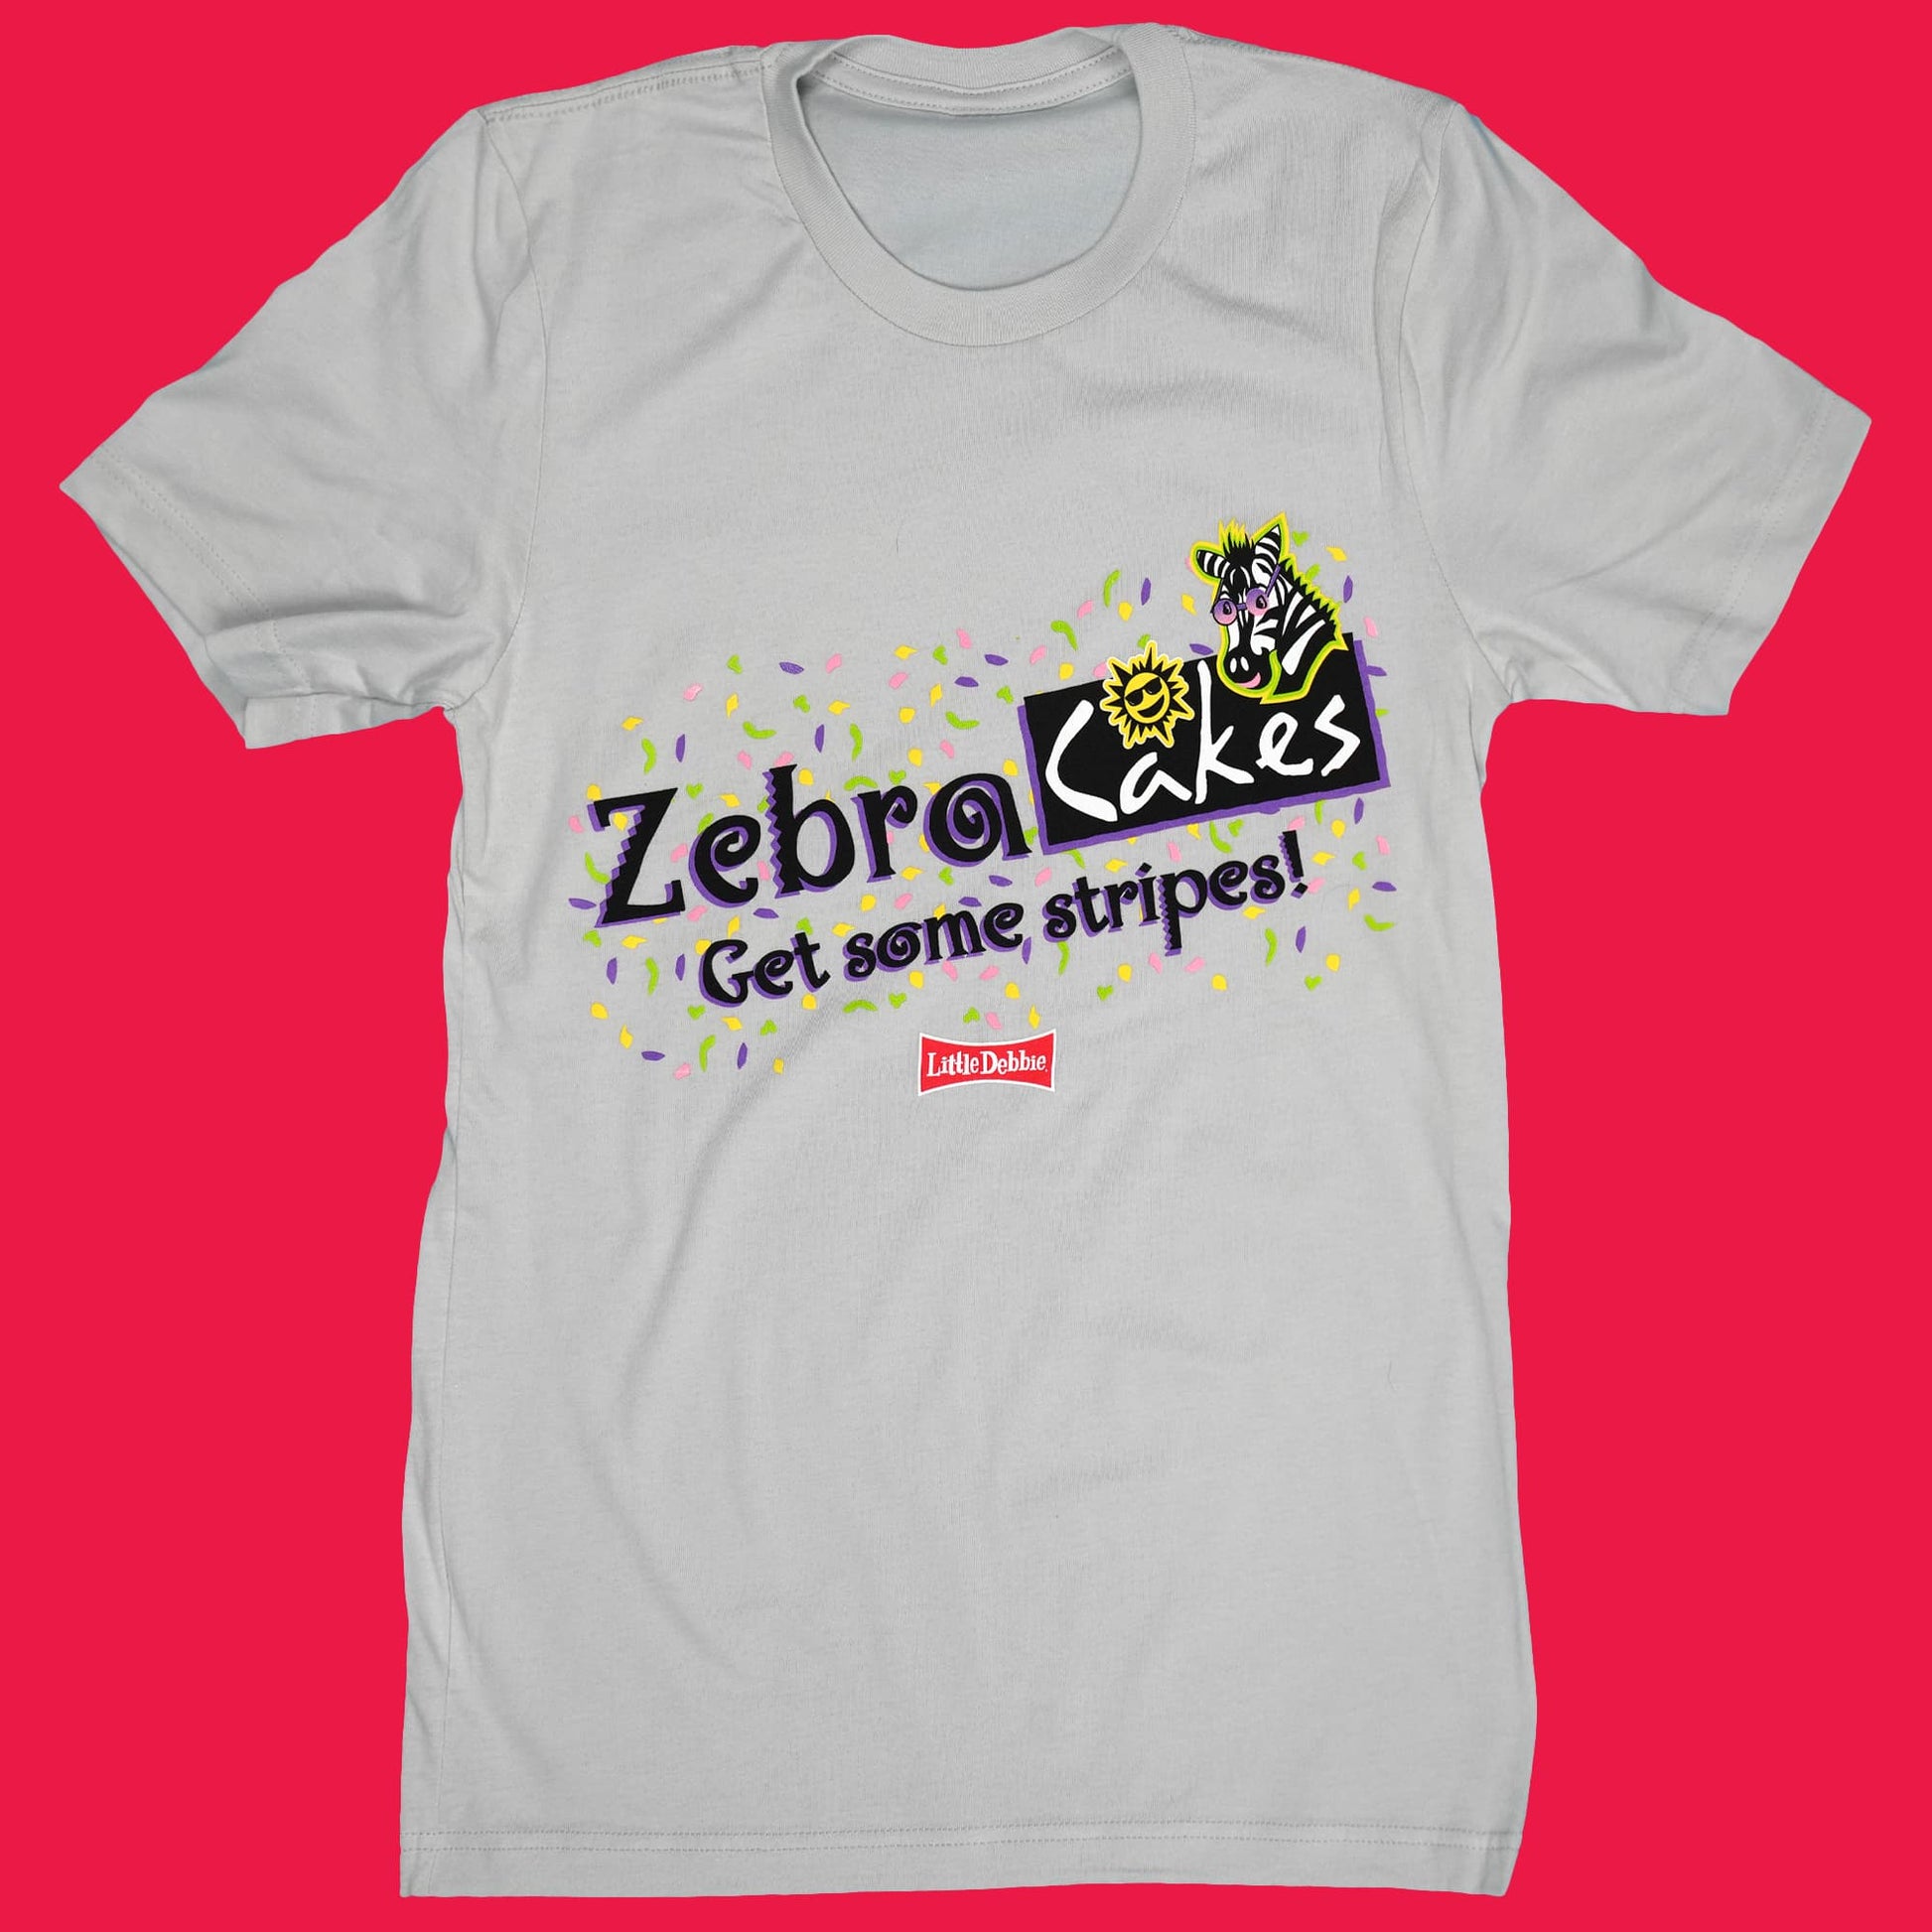 Light gray t-shirt featuring a vibrant design for Little Debbie Zebra Cakes. The logo in black and purple reads 'Zebra Cakes' with the slogan 'Get some stripes!' underneath in yellow. There's a playful depiction of a cartoon zebra and a sun, both in yellow and black, to the right of the text. The background is speckled with small, colorful paint splatters in purple and yellow. A small red Little Debbie logo is positioned below the main design.